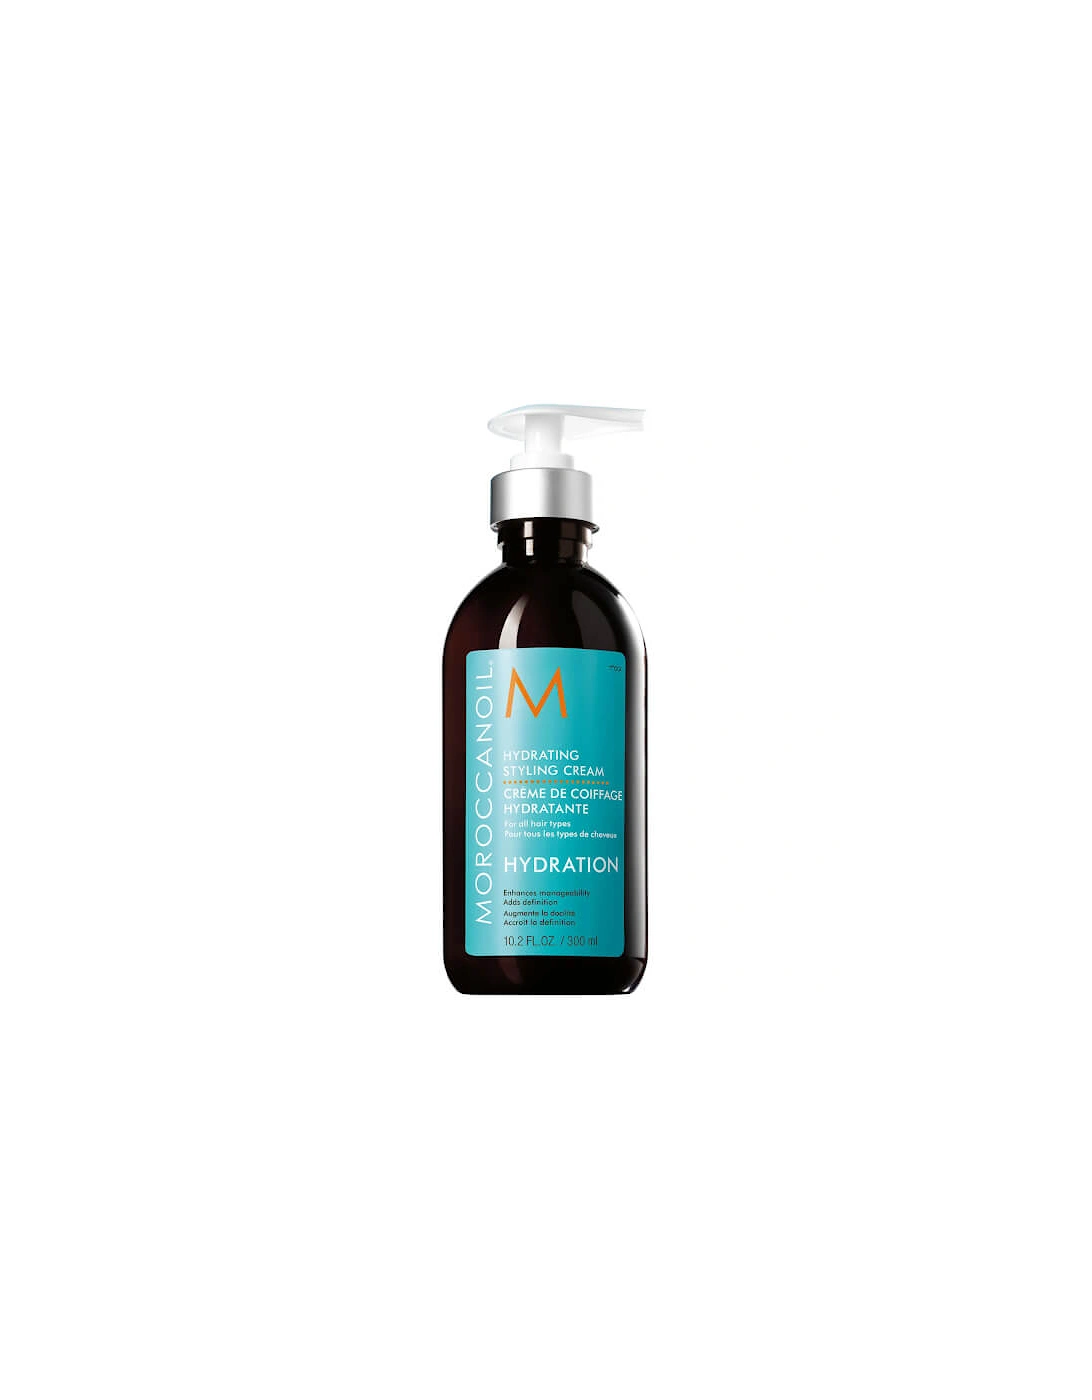 Moroccanoil Hydrating Styling Cream 300ml - Moroccanoil - Hydrating Styling Cream 300ml - Snoodle - Hydrating Styling Cream 300ml - Annie, 2 of 1